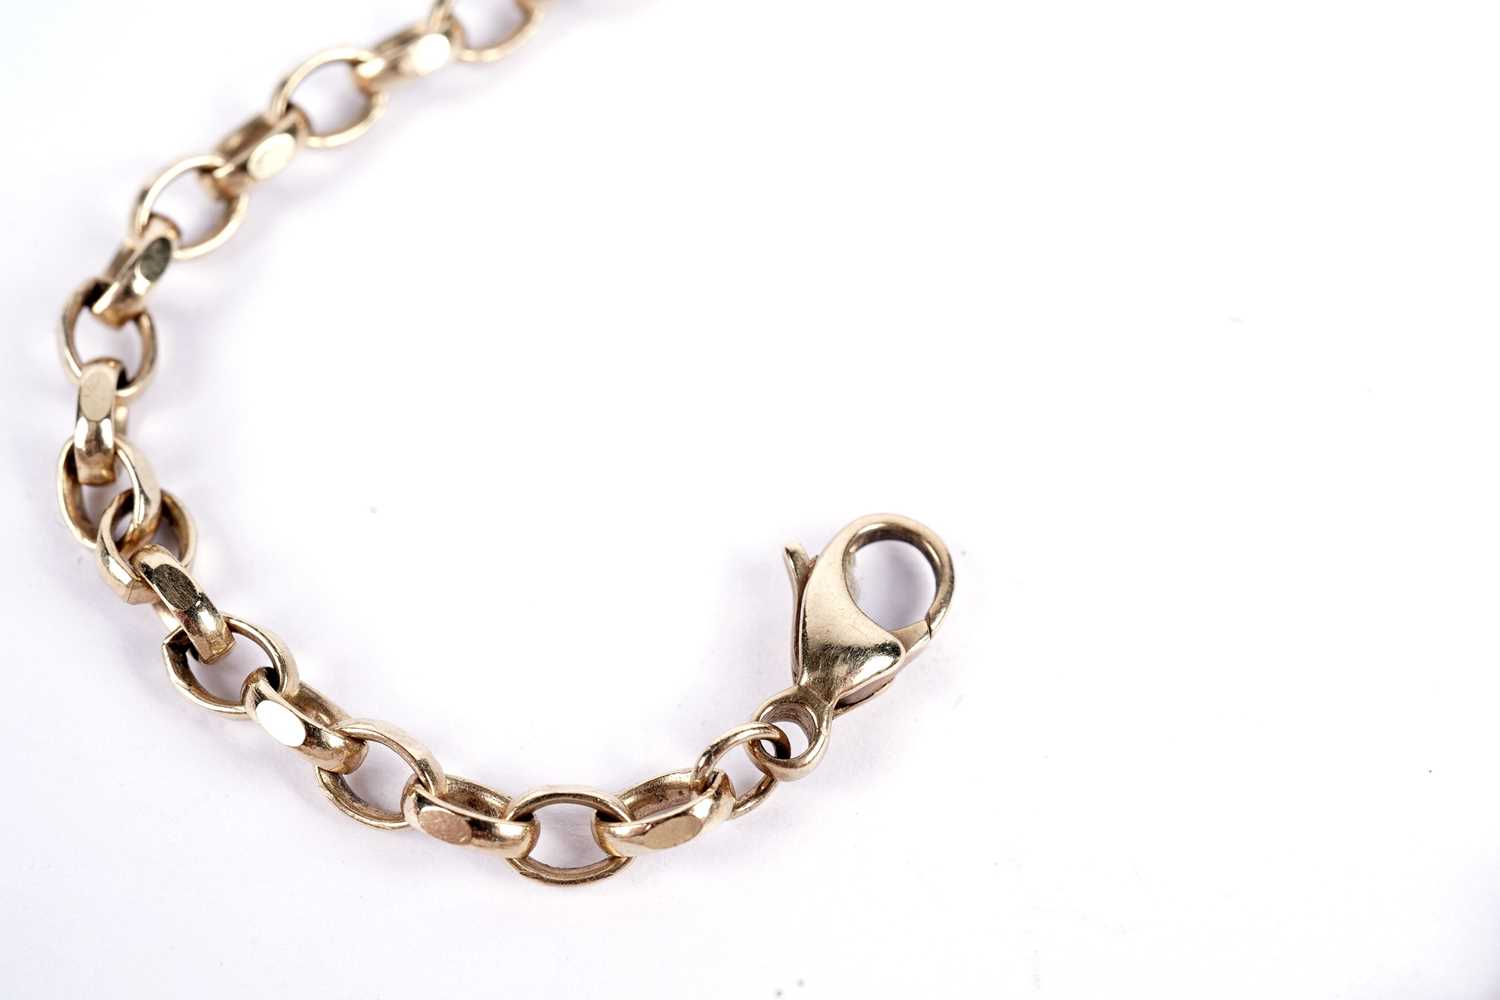 A 9ct yellow gold belcher link chain necklace - Image 3 of 4